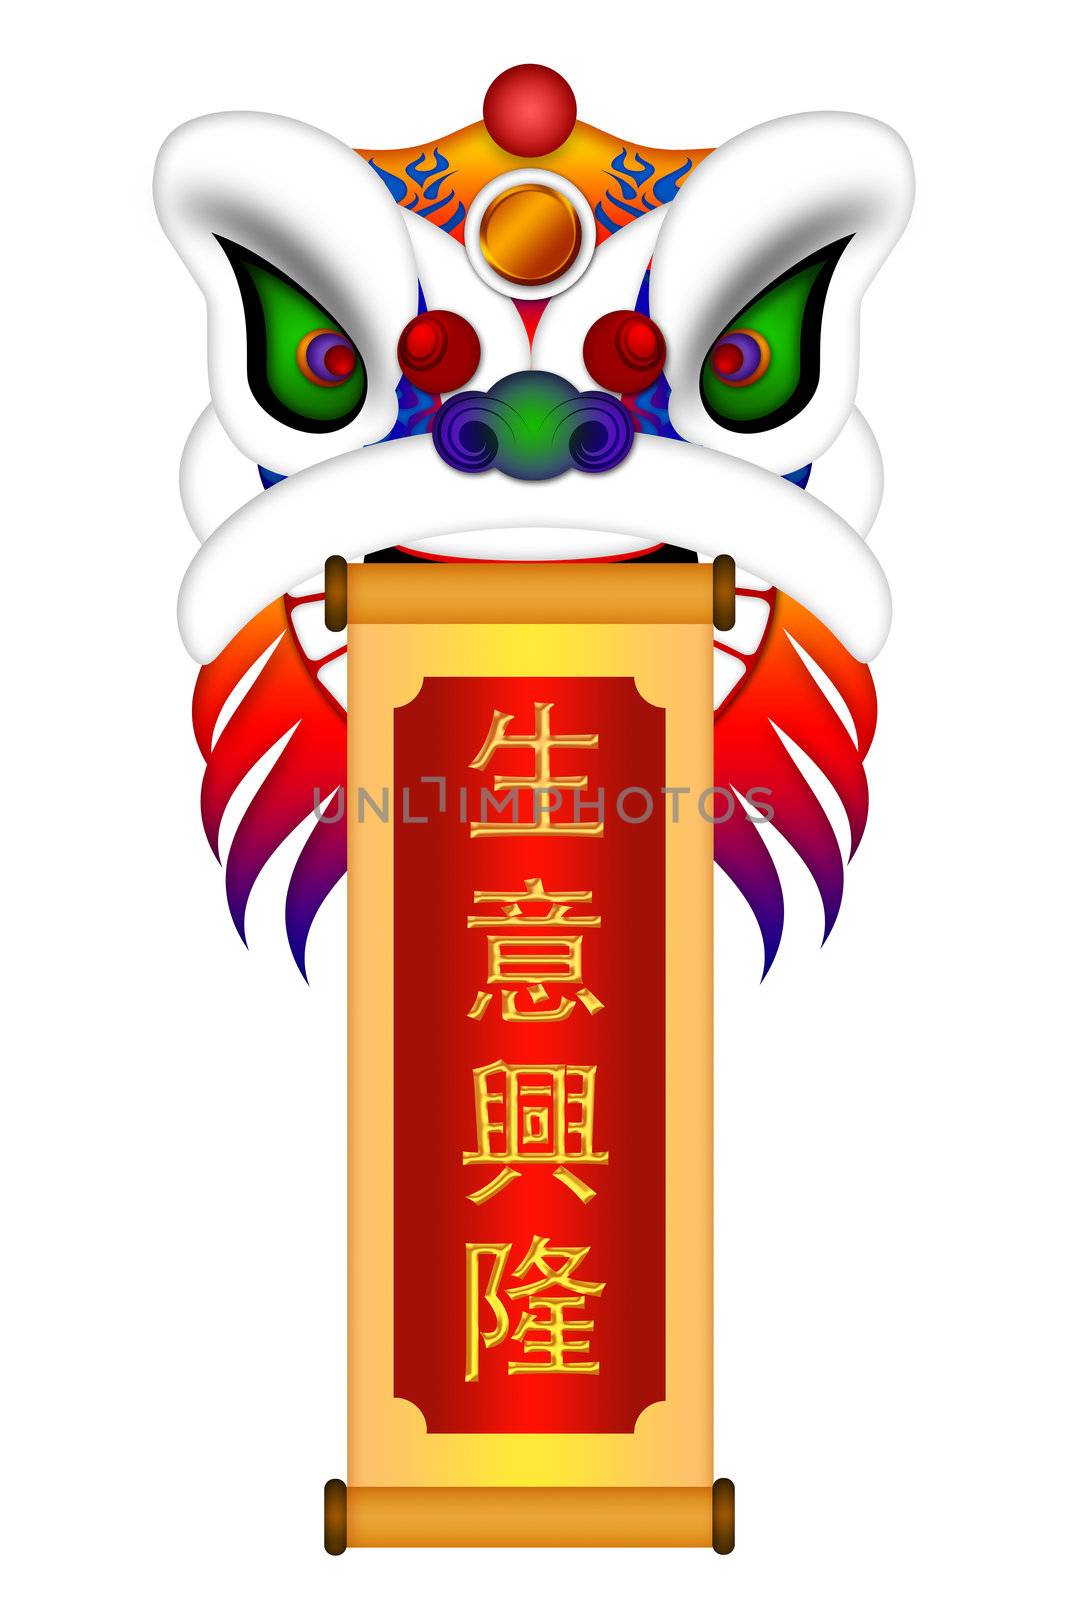 Chinese Lion Dance Colorful Ornate Head and Scroll with Text Wishing Prosperous Business Illustration Isolated on White Background